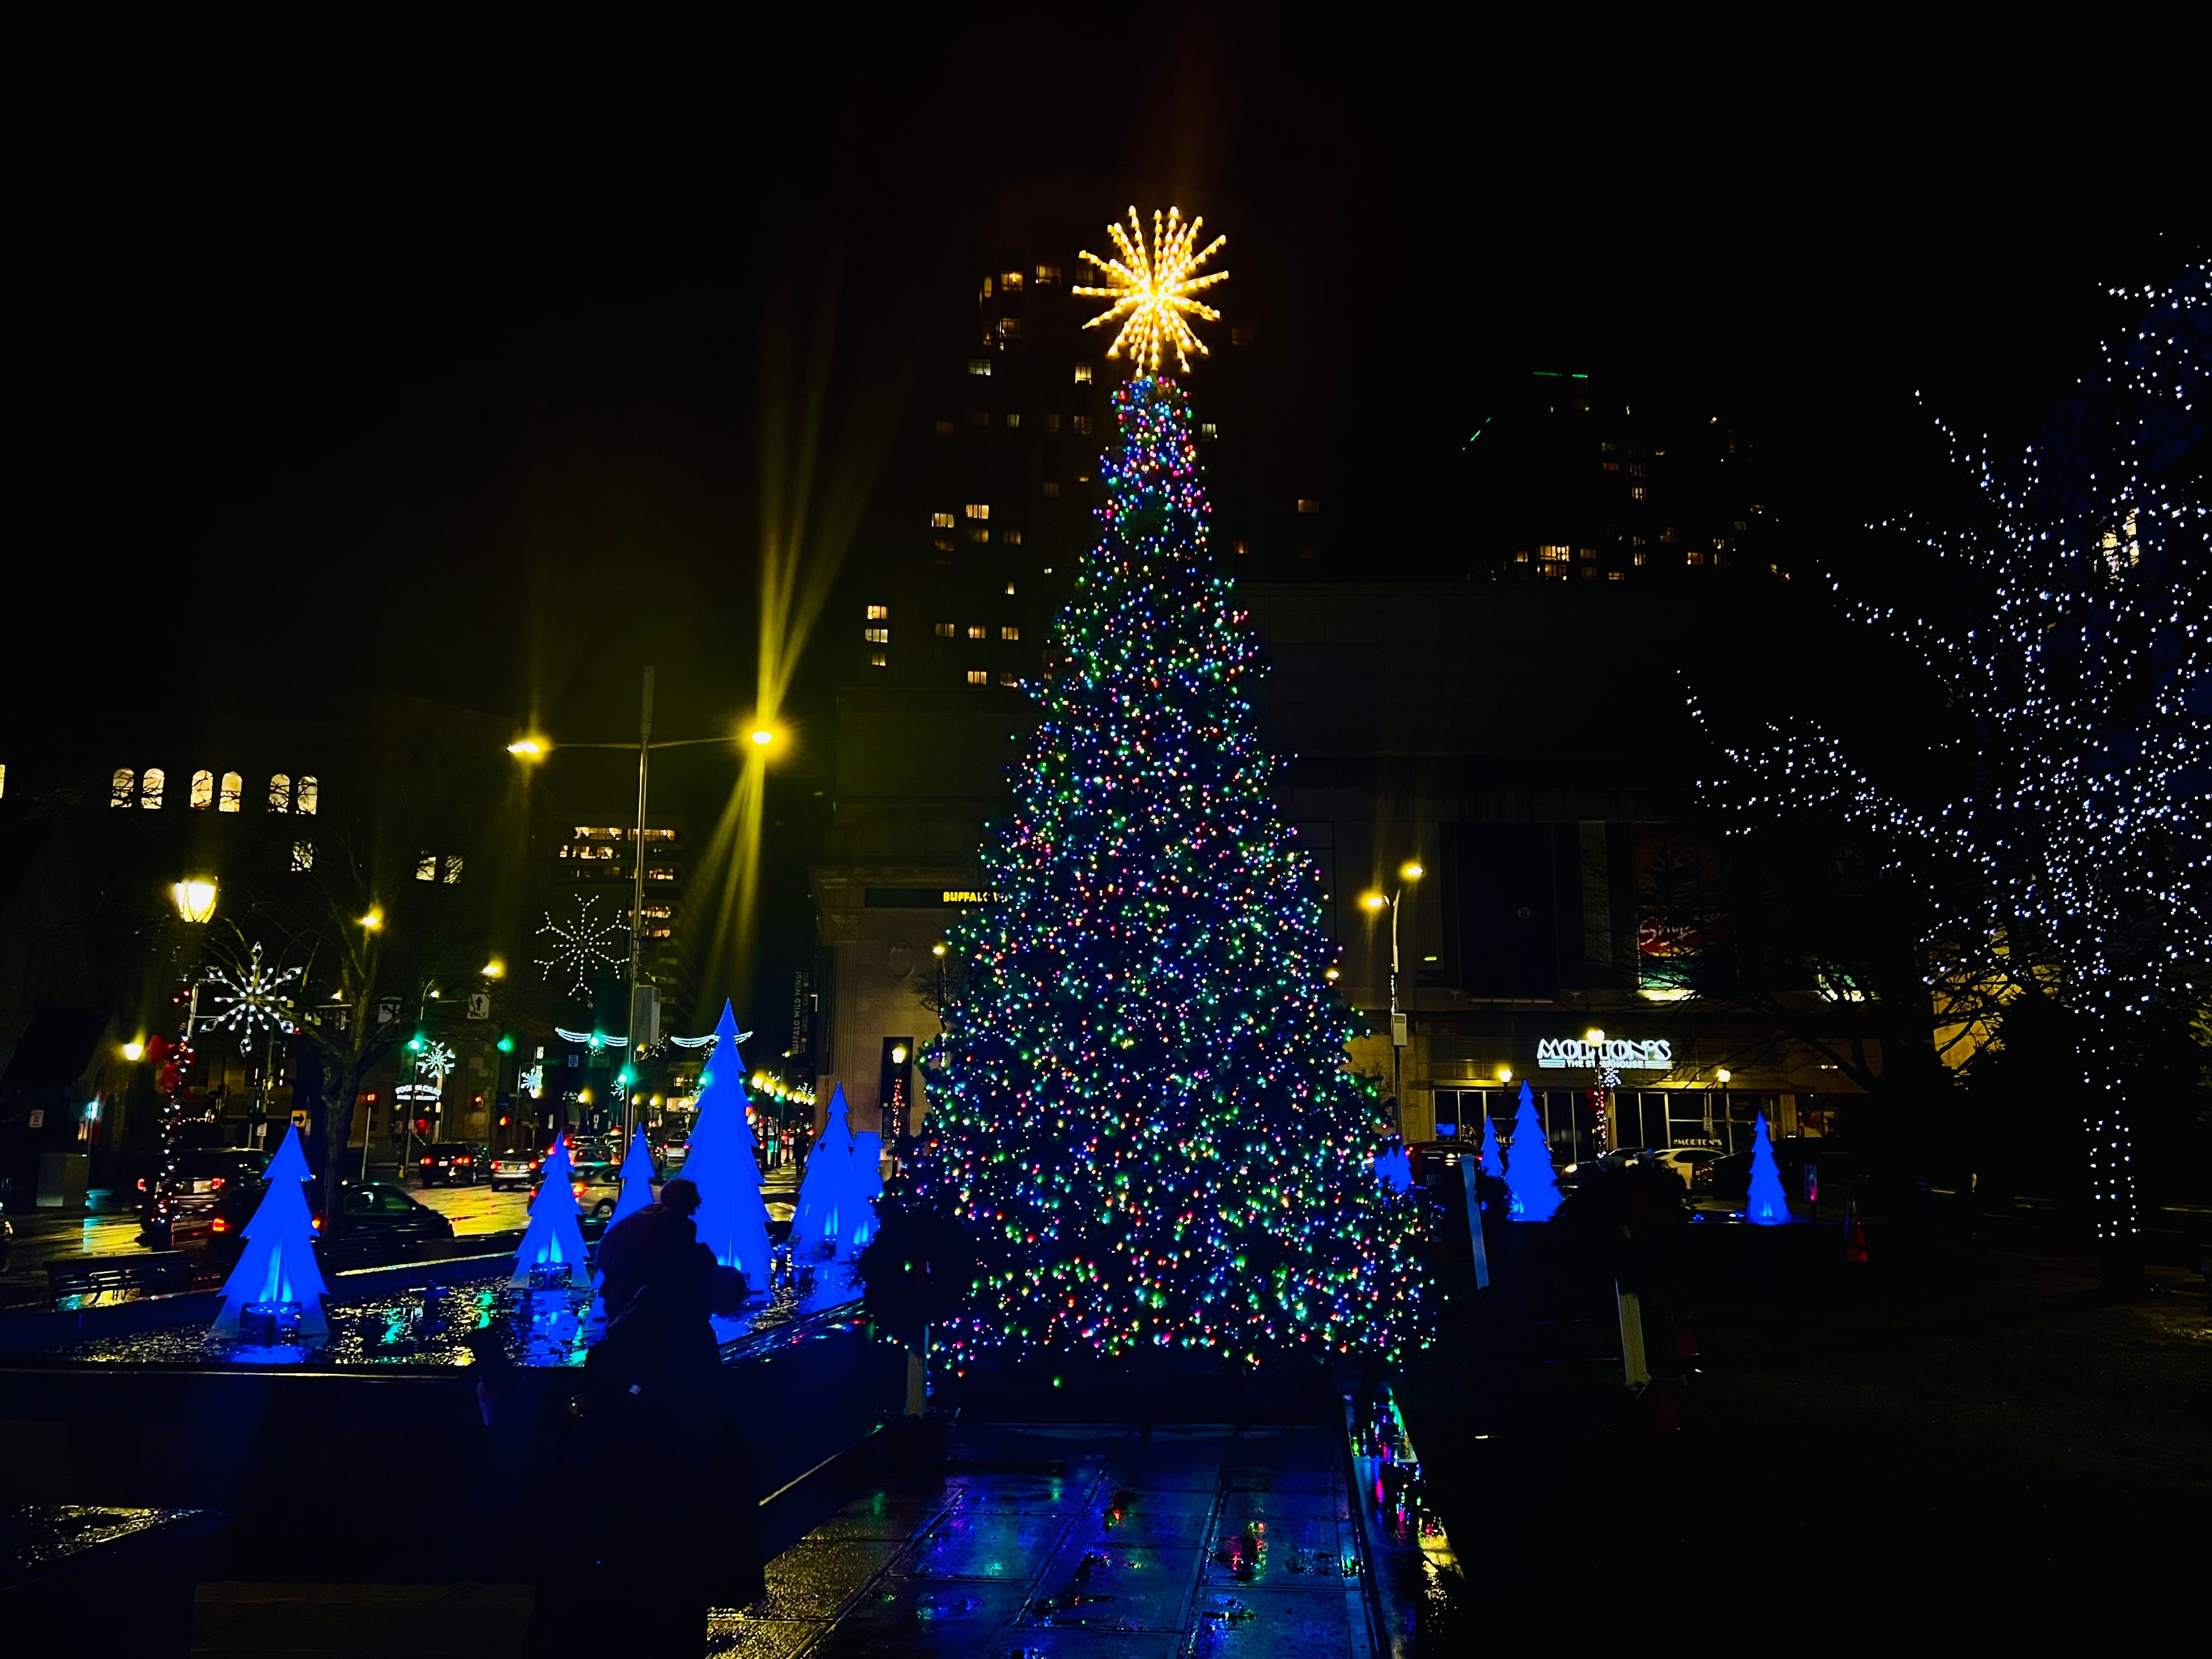 A 24' programmable RGB branch tree in Renaissance Plaza, City of White Plains, NY